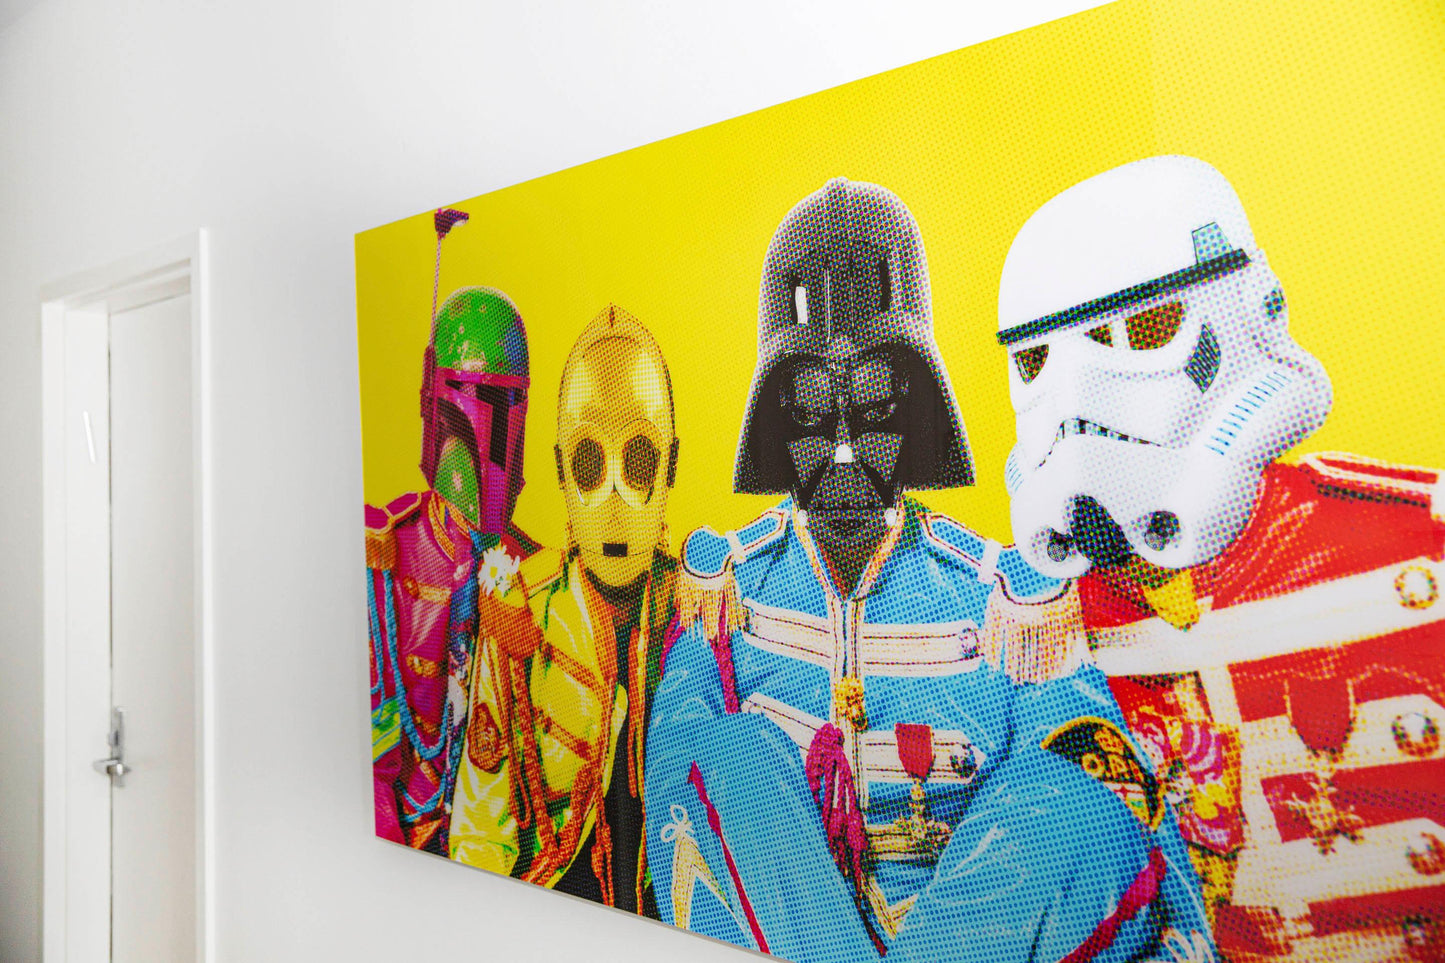 Sgt. Vader's Lonely Death Star Band (Série/Series) - Galerie d'Art Beauchamp